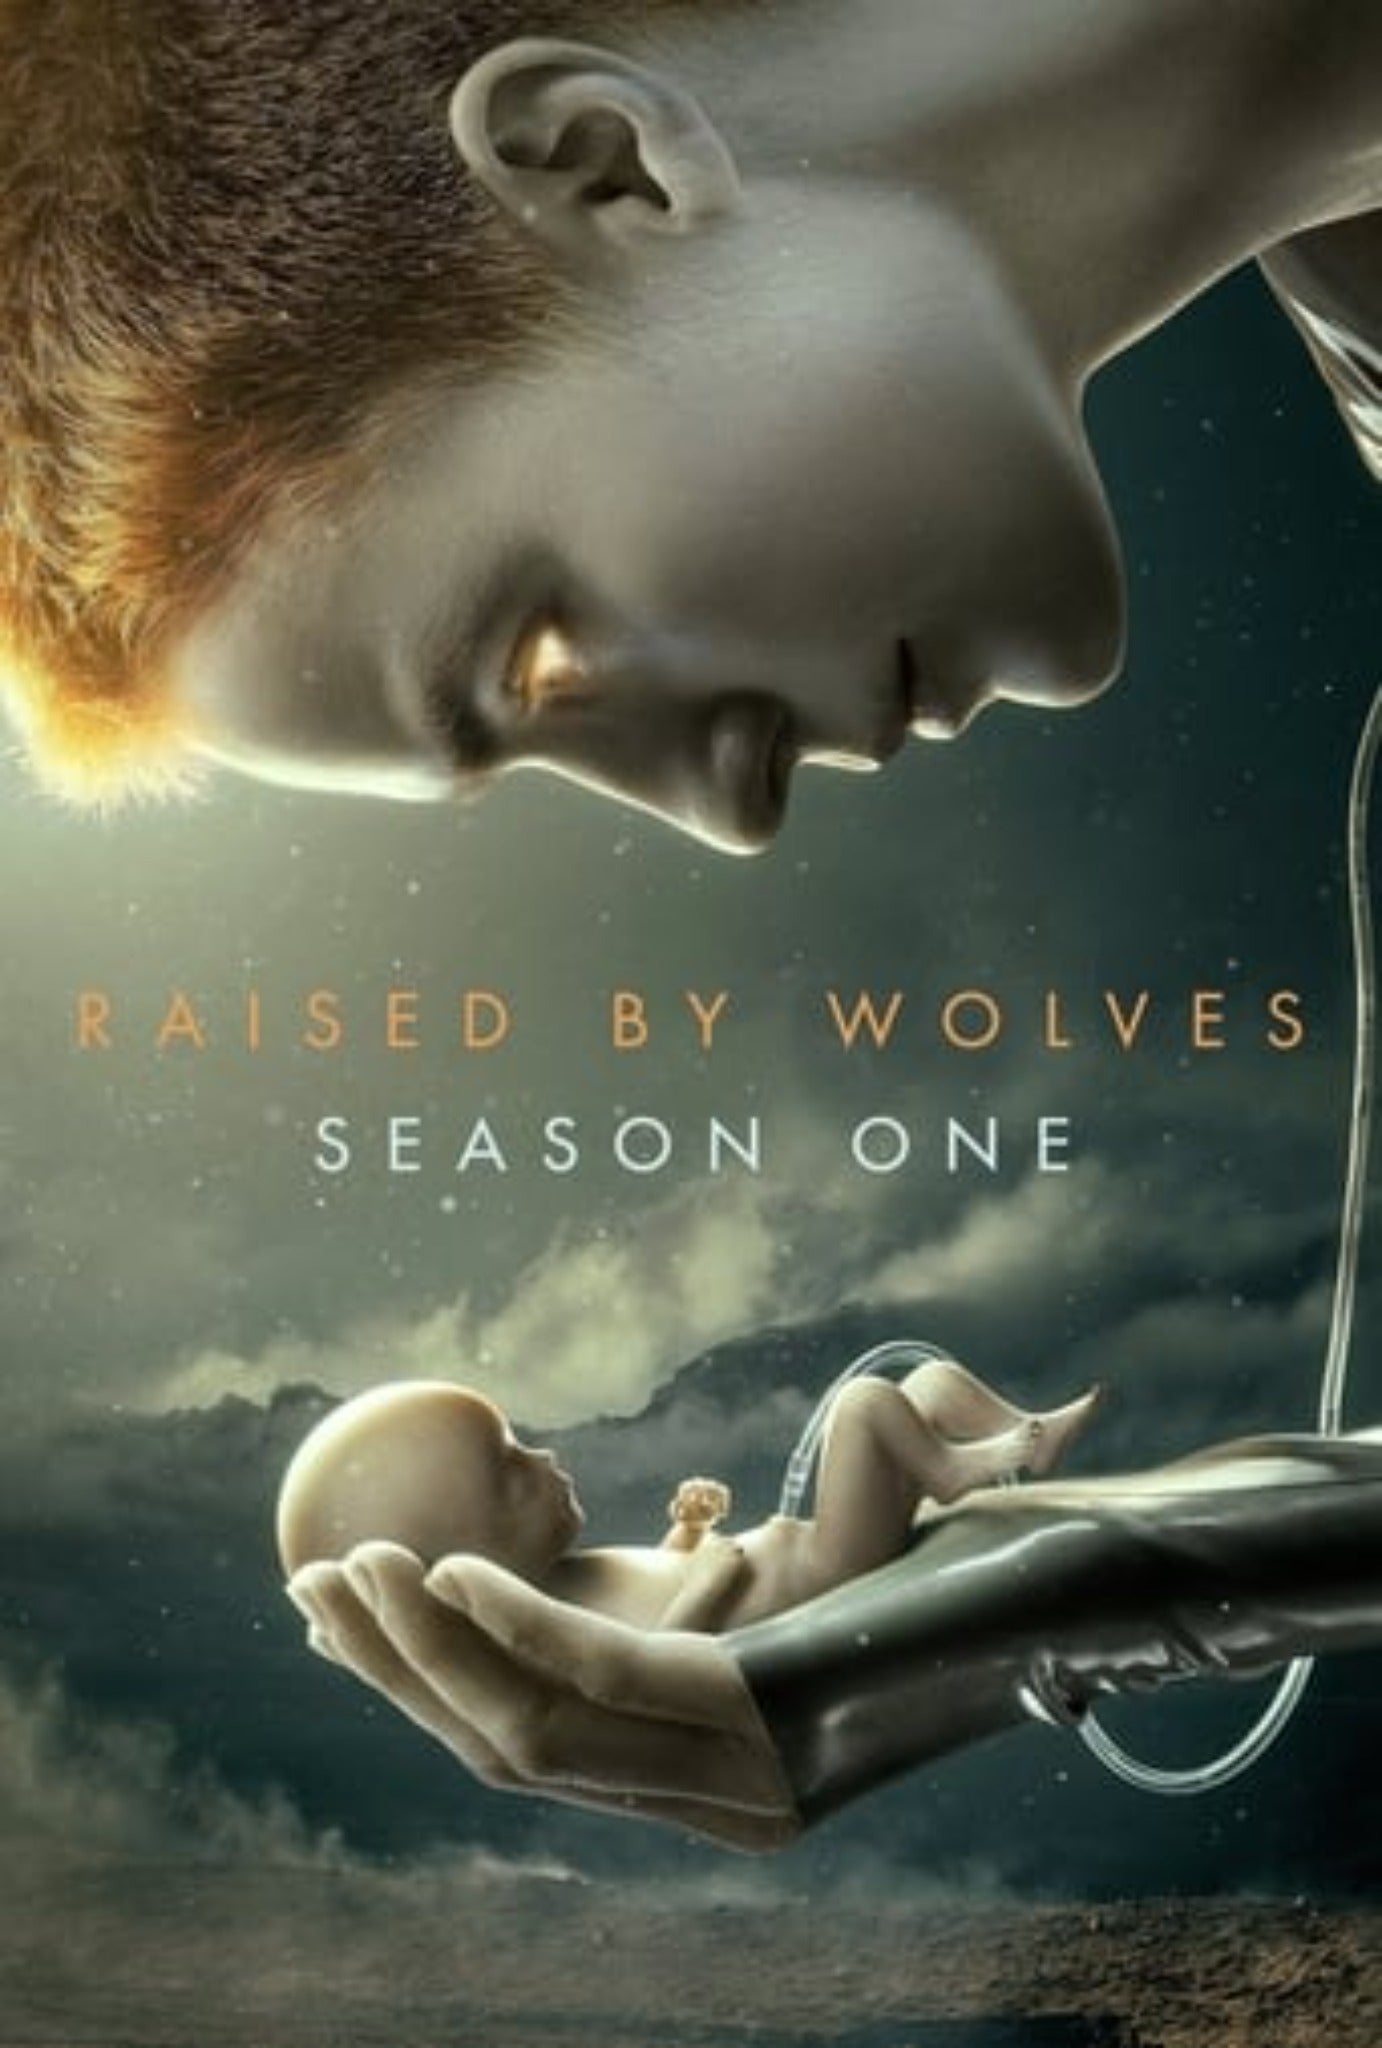 Raised by Wolves Season 1 Complete Pack 2020 Sci-Fi - Fantasy - Drama